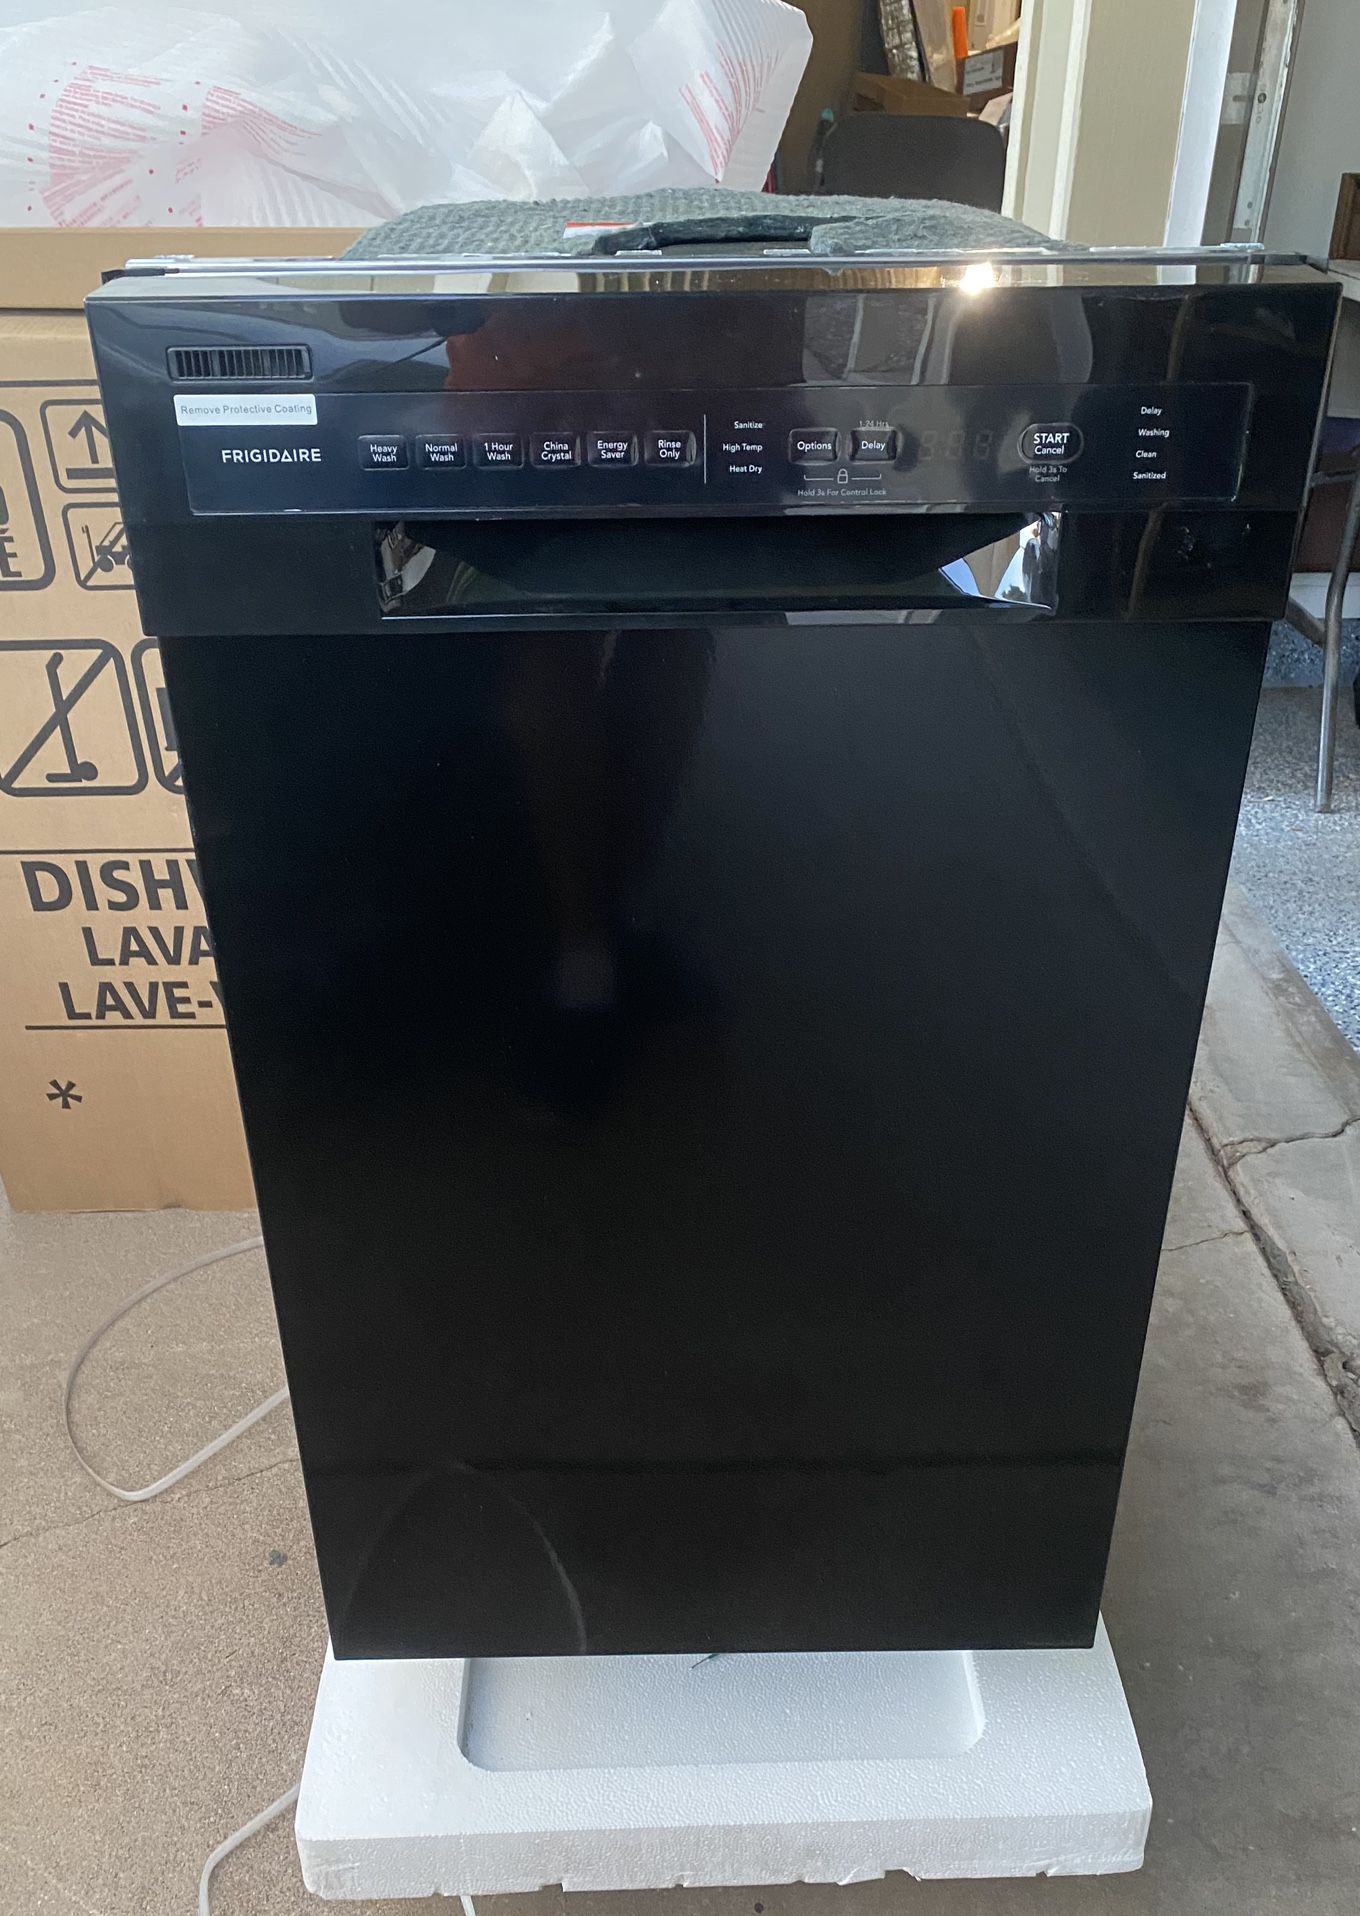 Contractor  Special  ***BRAND NEW*** Frigidaire 18 in. ADA Compact Front Control Dishwasher